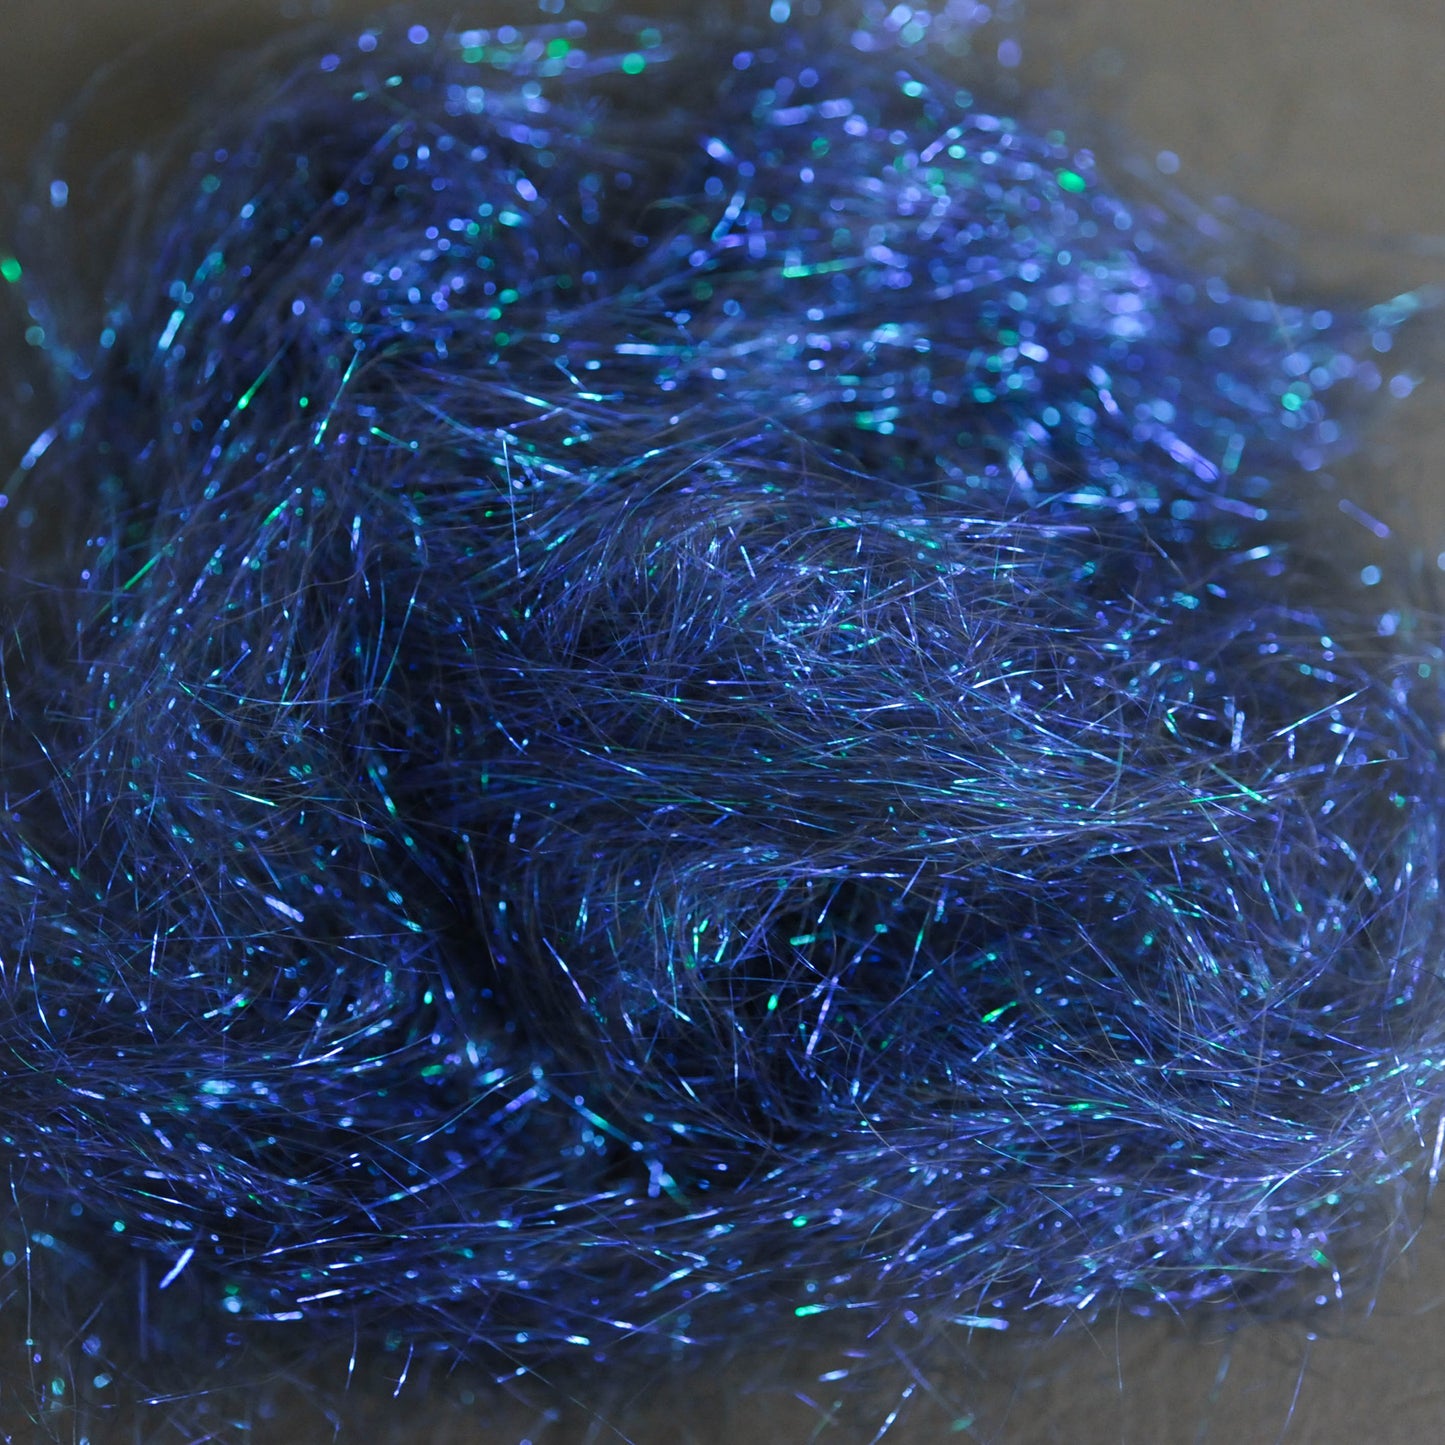 Angelina 1/2 oz - Multiple colors available